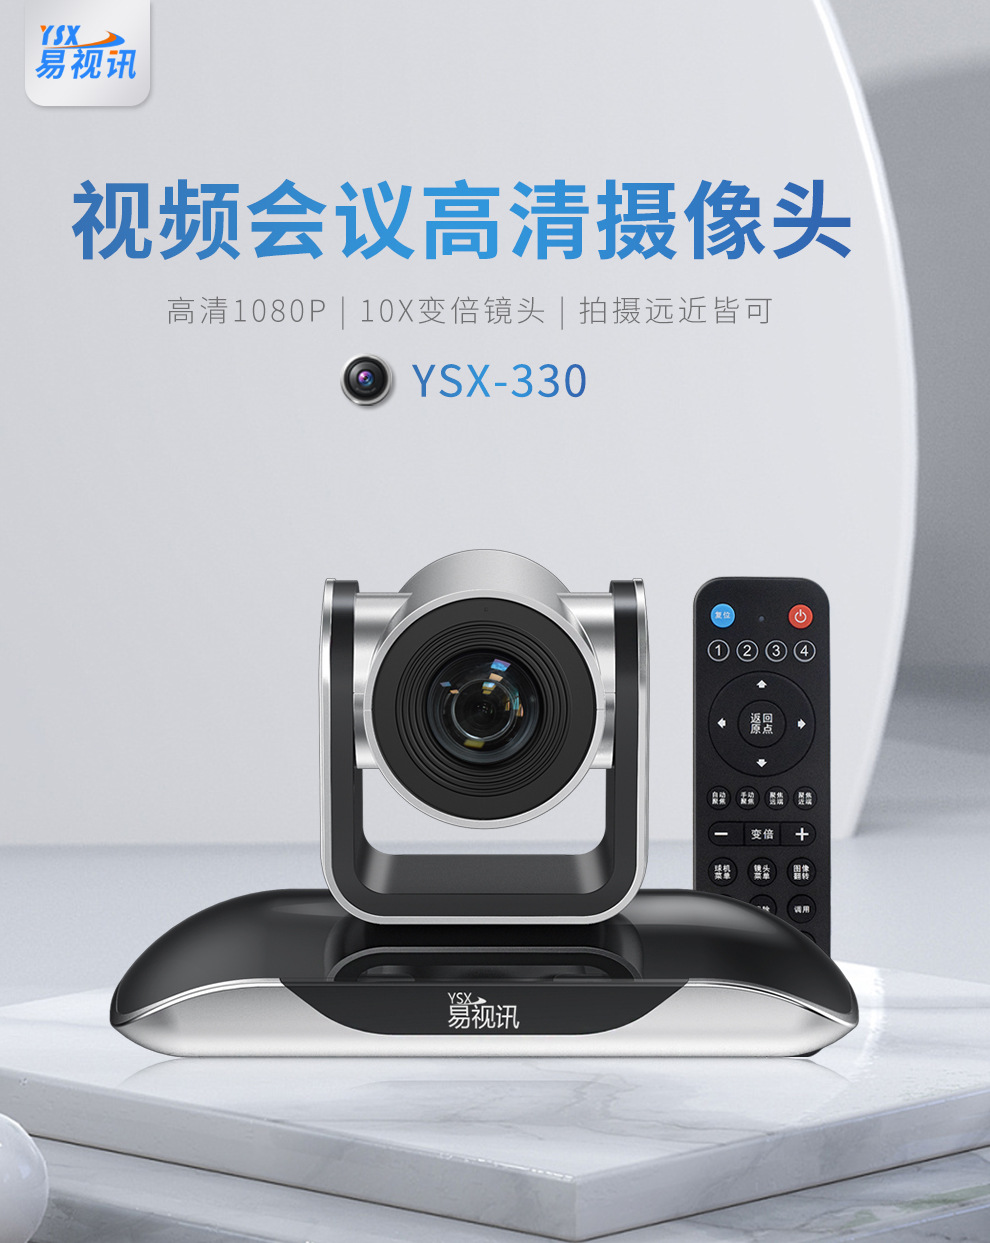 YSX high-definition video conferencing camera YSX-330 solution for large, medium, and small video conferencing